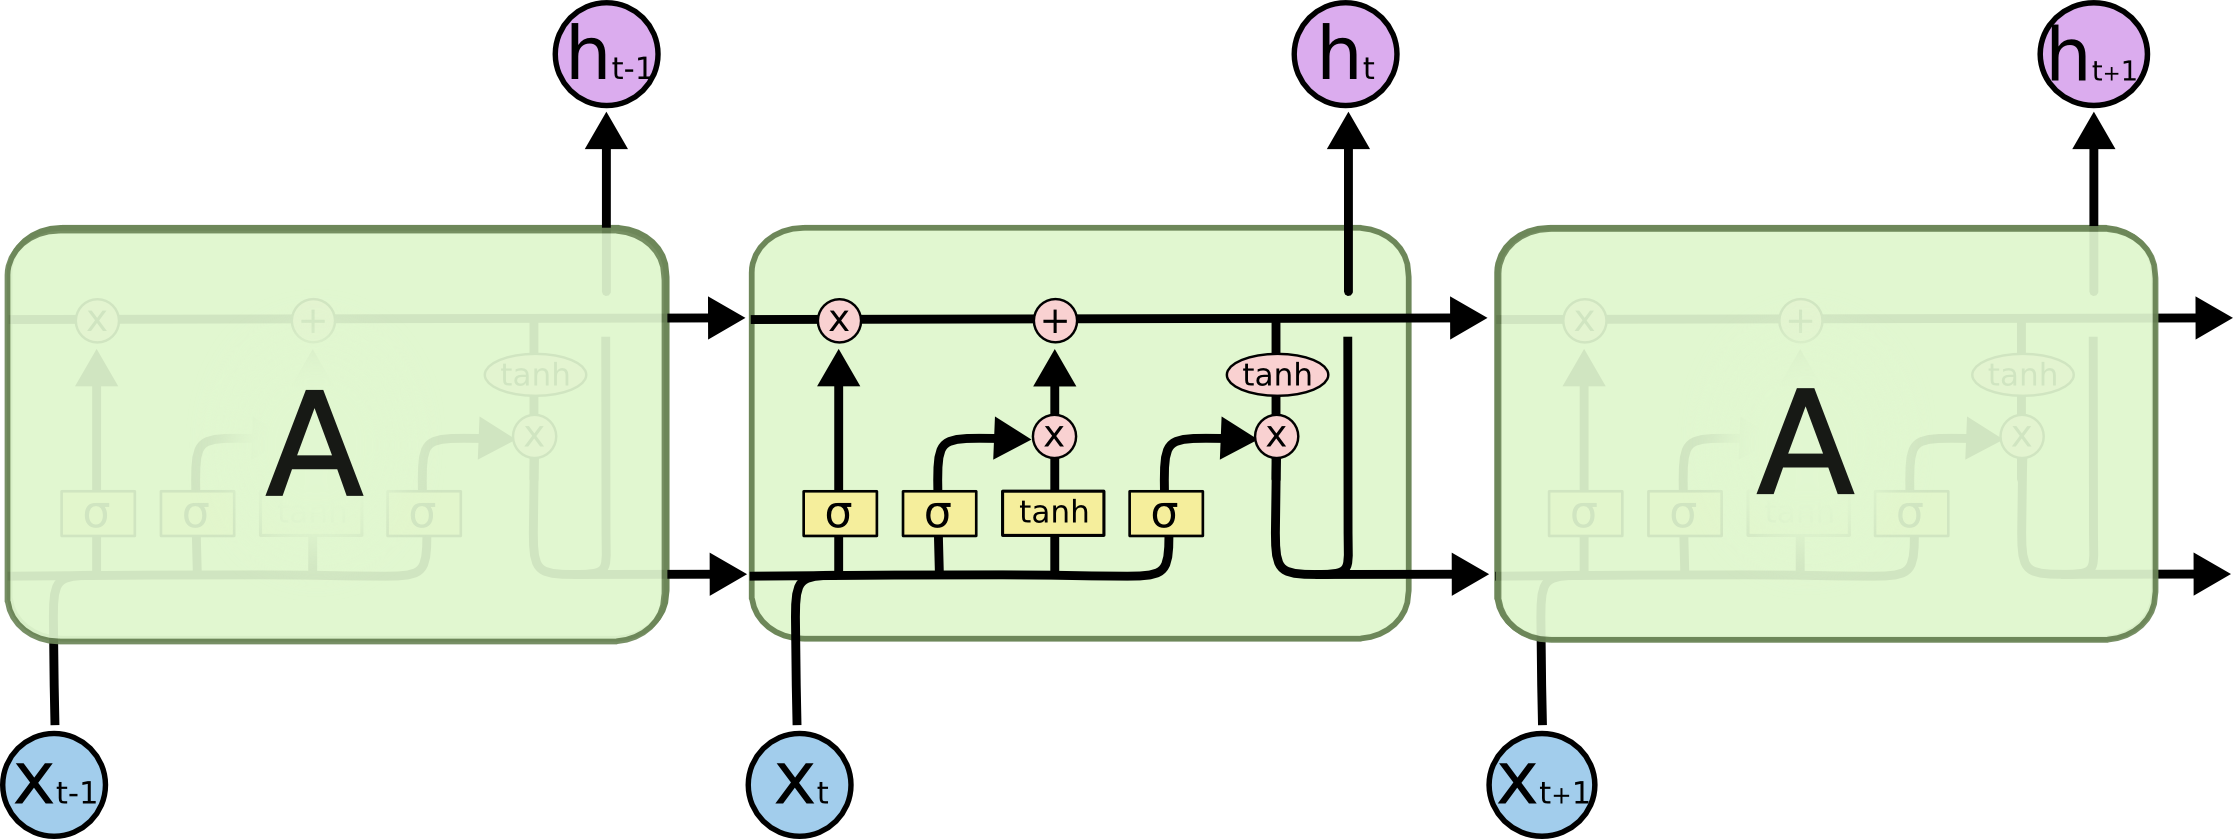 LSTM Layers